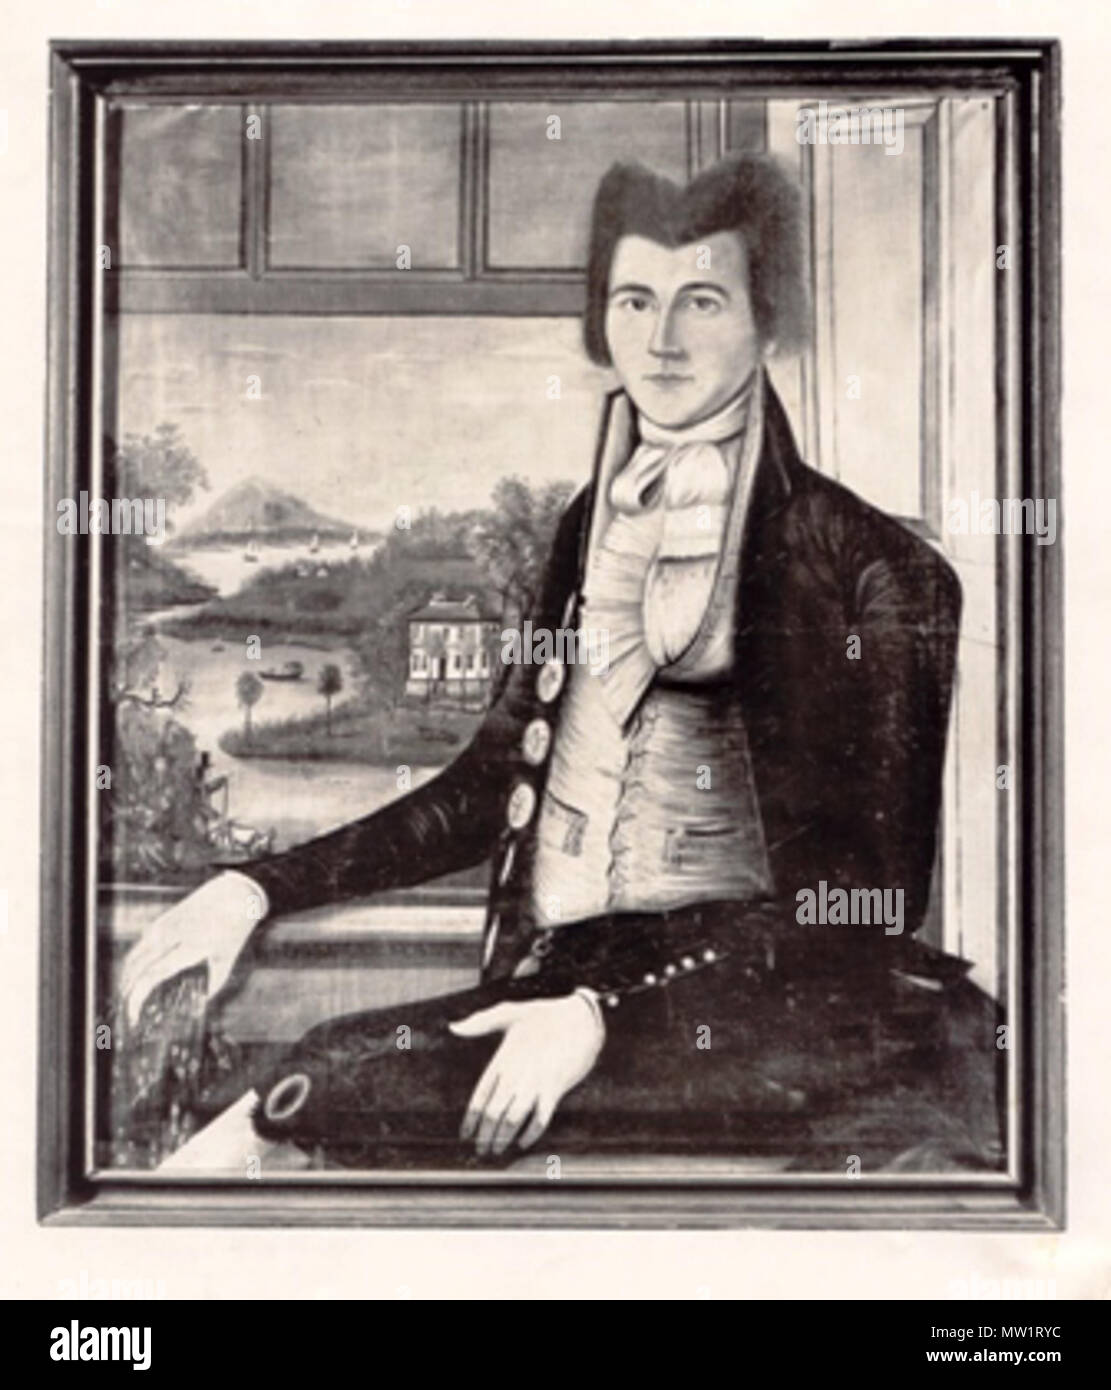 . English: Portrait of composer Timothy Swan (1758-1843), sometime resident of Suffield, Connecticut. Swan was born in Worcester, Mass., and apprenticed as a hat maker. He later briefly attended singing school, and learned to play the flute in 1776 as a member of the Continental Army. Swan is well-known for the hymns he composed. Unknown date (subject died in 1843). Unknown 607 Timothy Swan composer Stock Photo